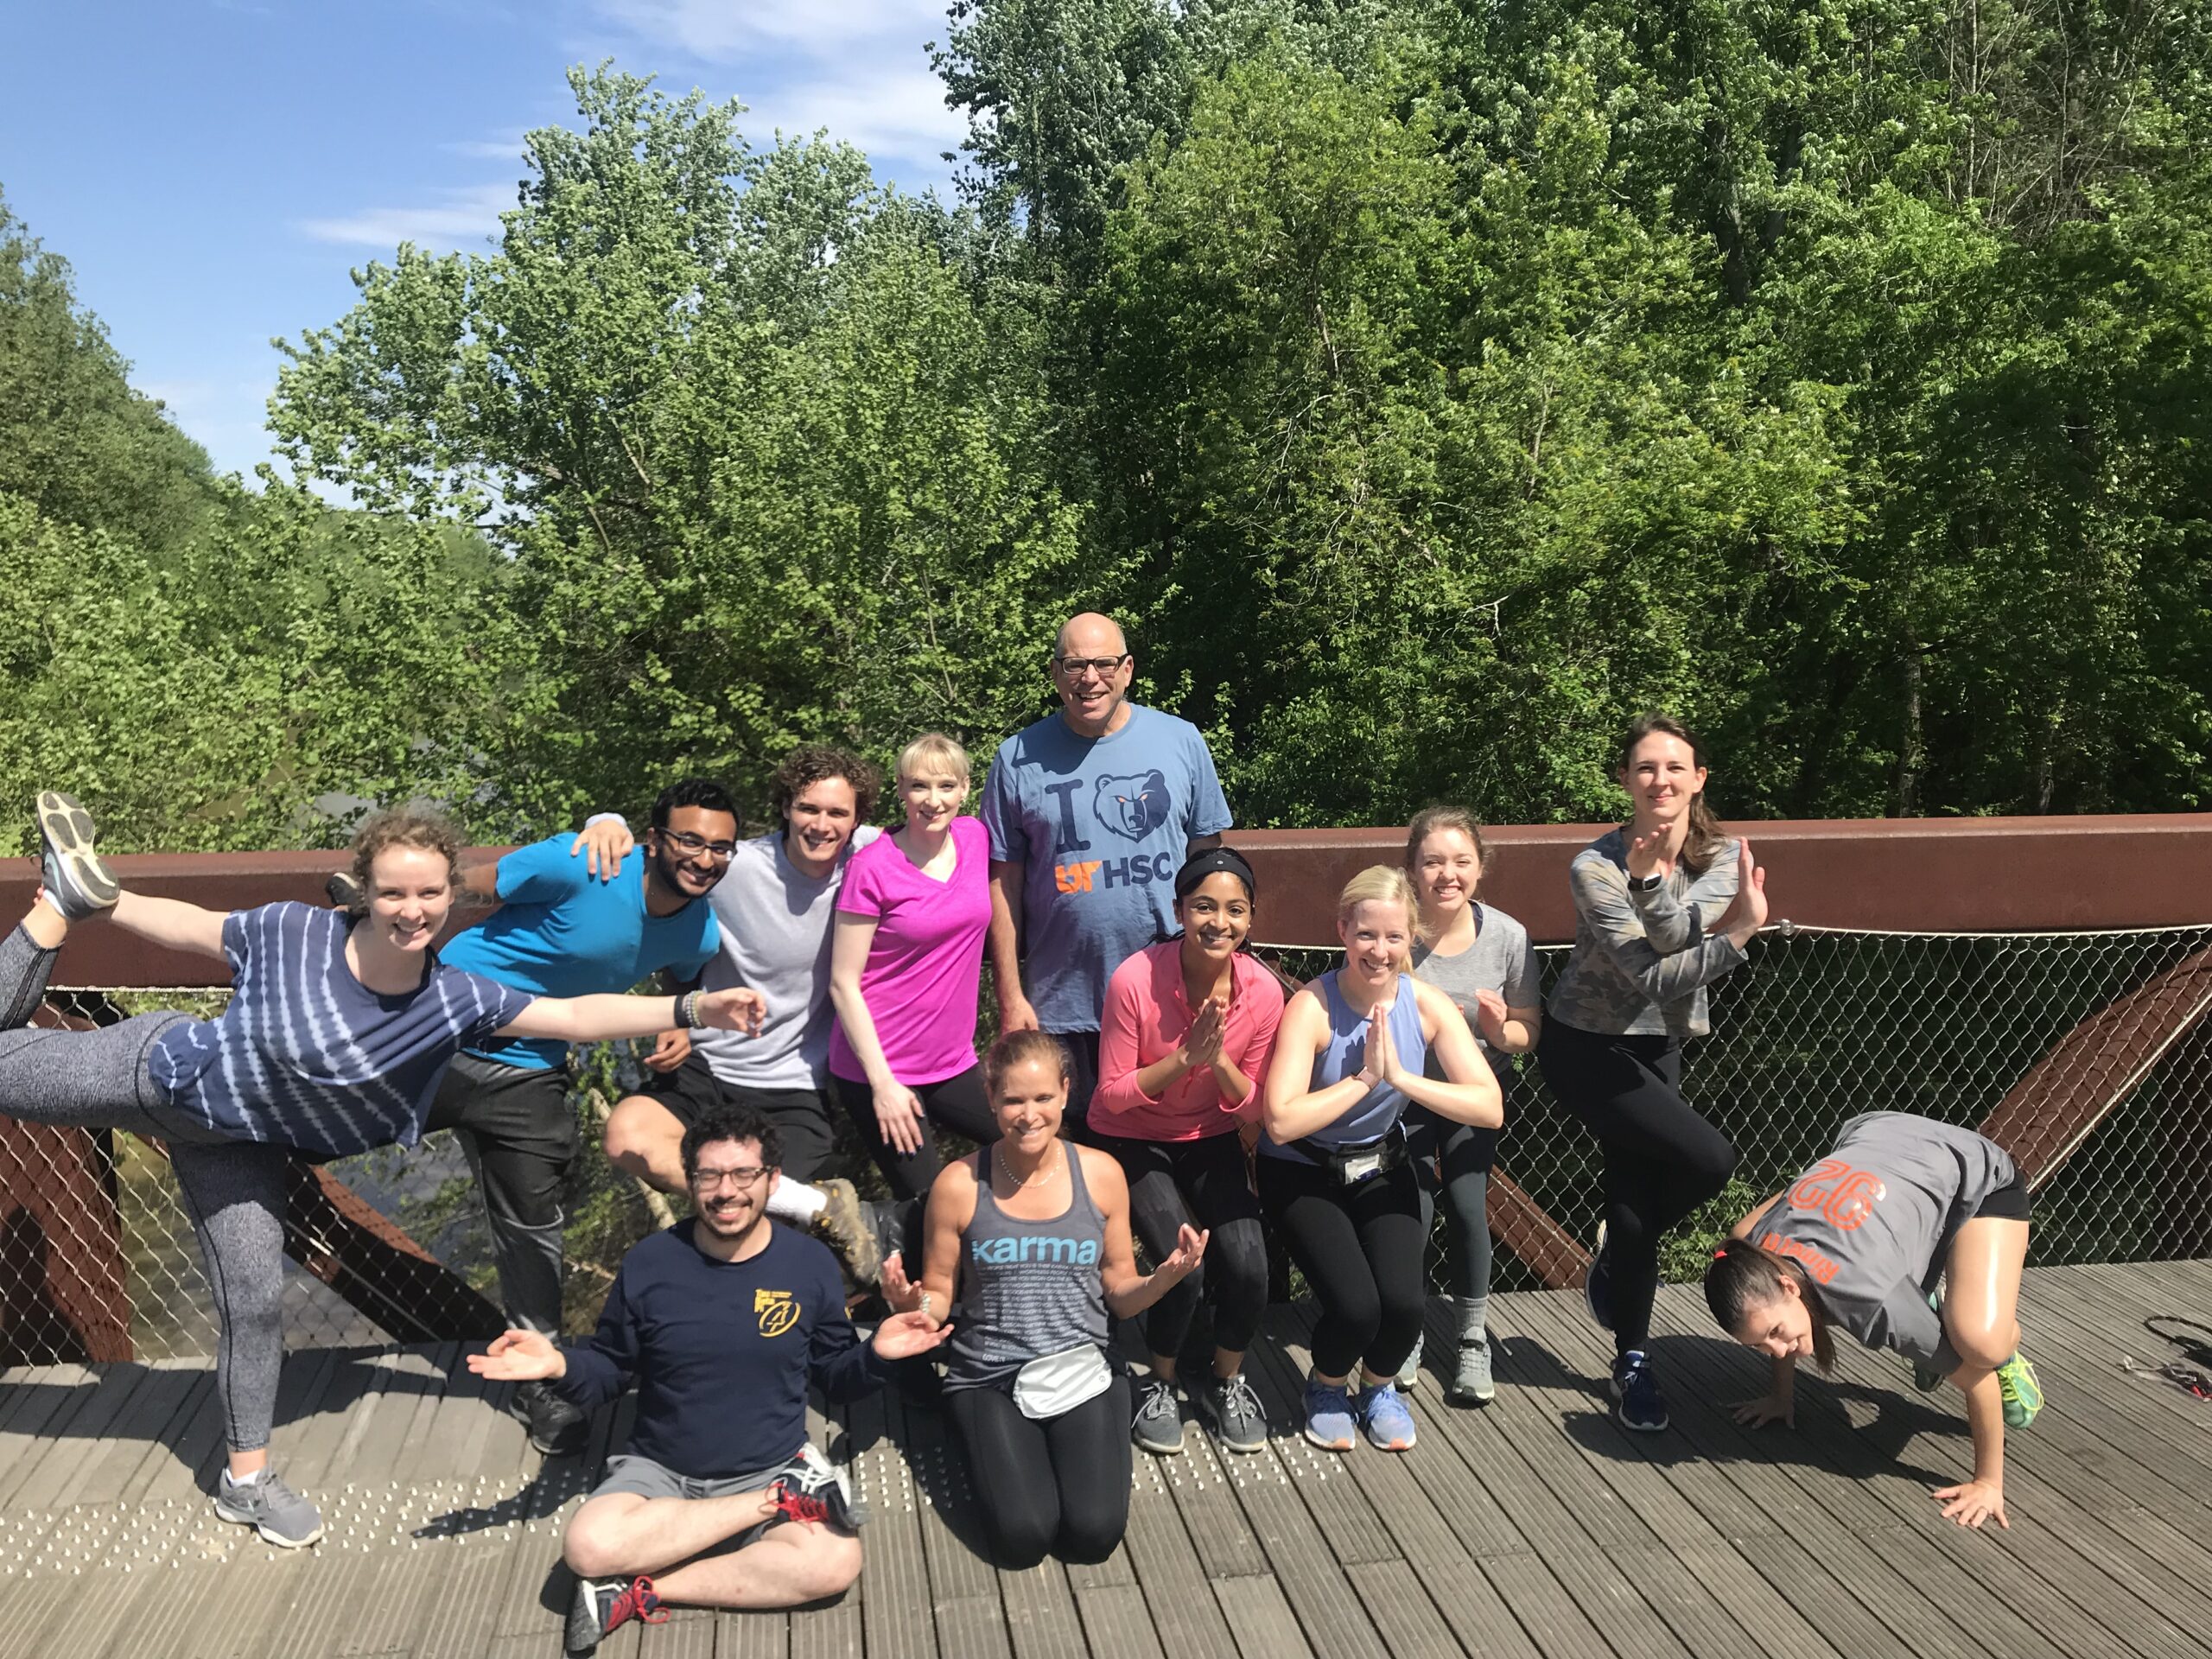 Finding their breath—Kimberlee Strome (seated), director of Mind Body Wellness at UT Health Science Center, plans YOGAhikes featuring yoga practice in between fast hiking bursts.